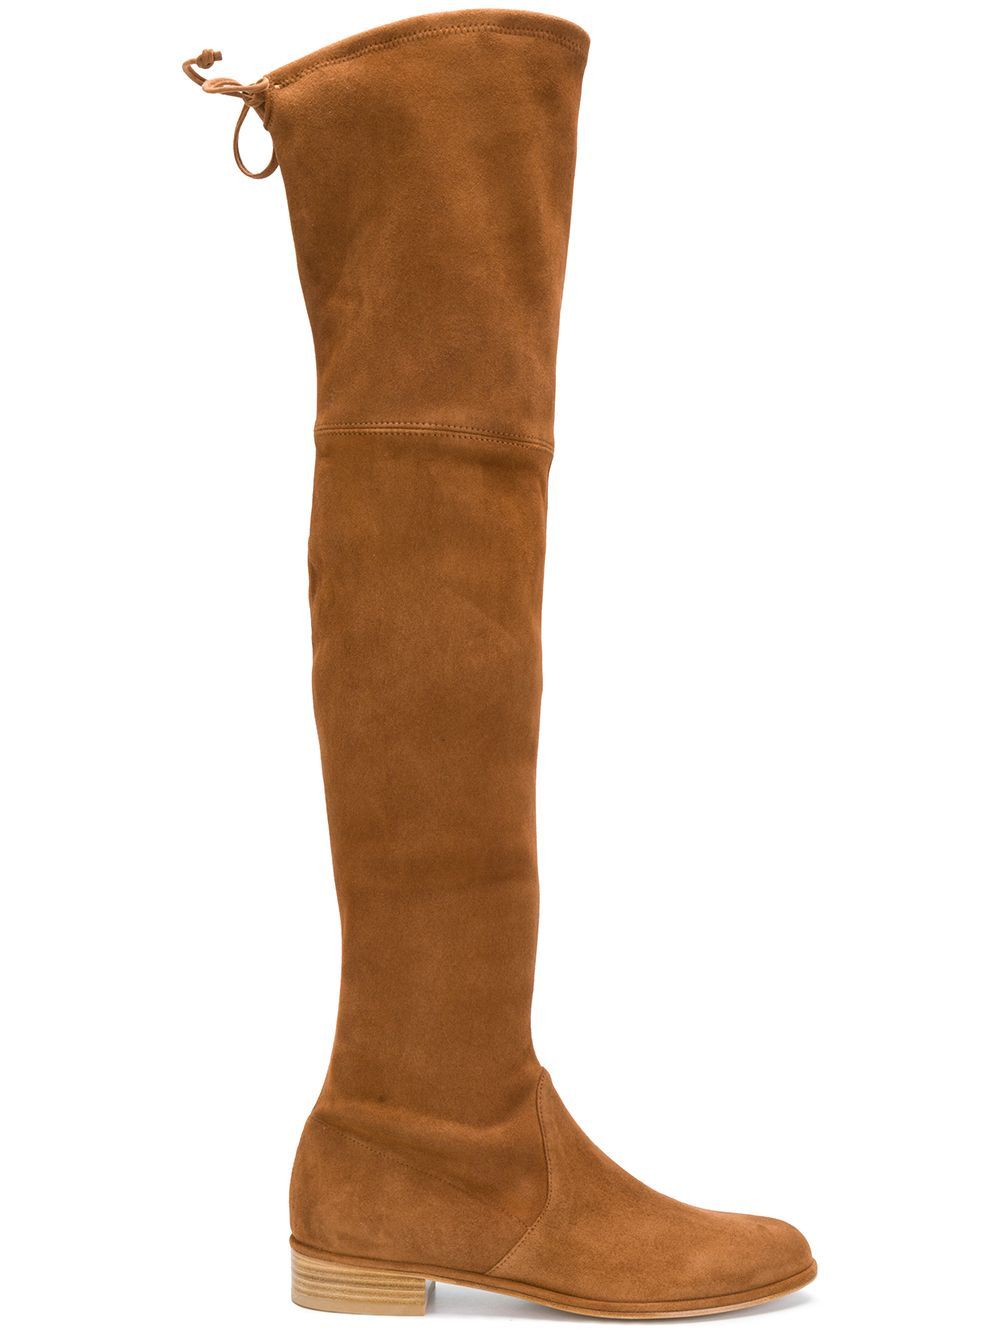 Stuart Weitzman Lowland over the knee boots - Brown | FarFetch US